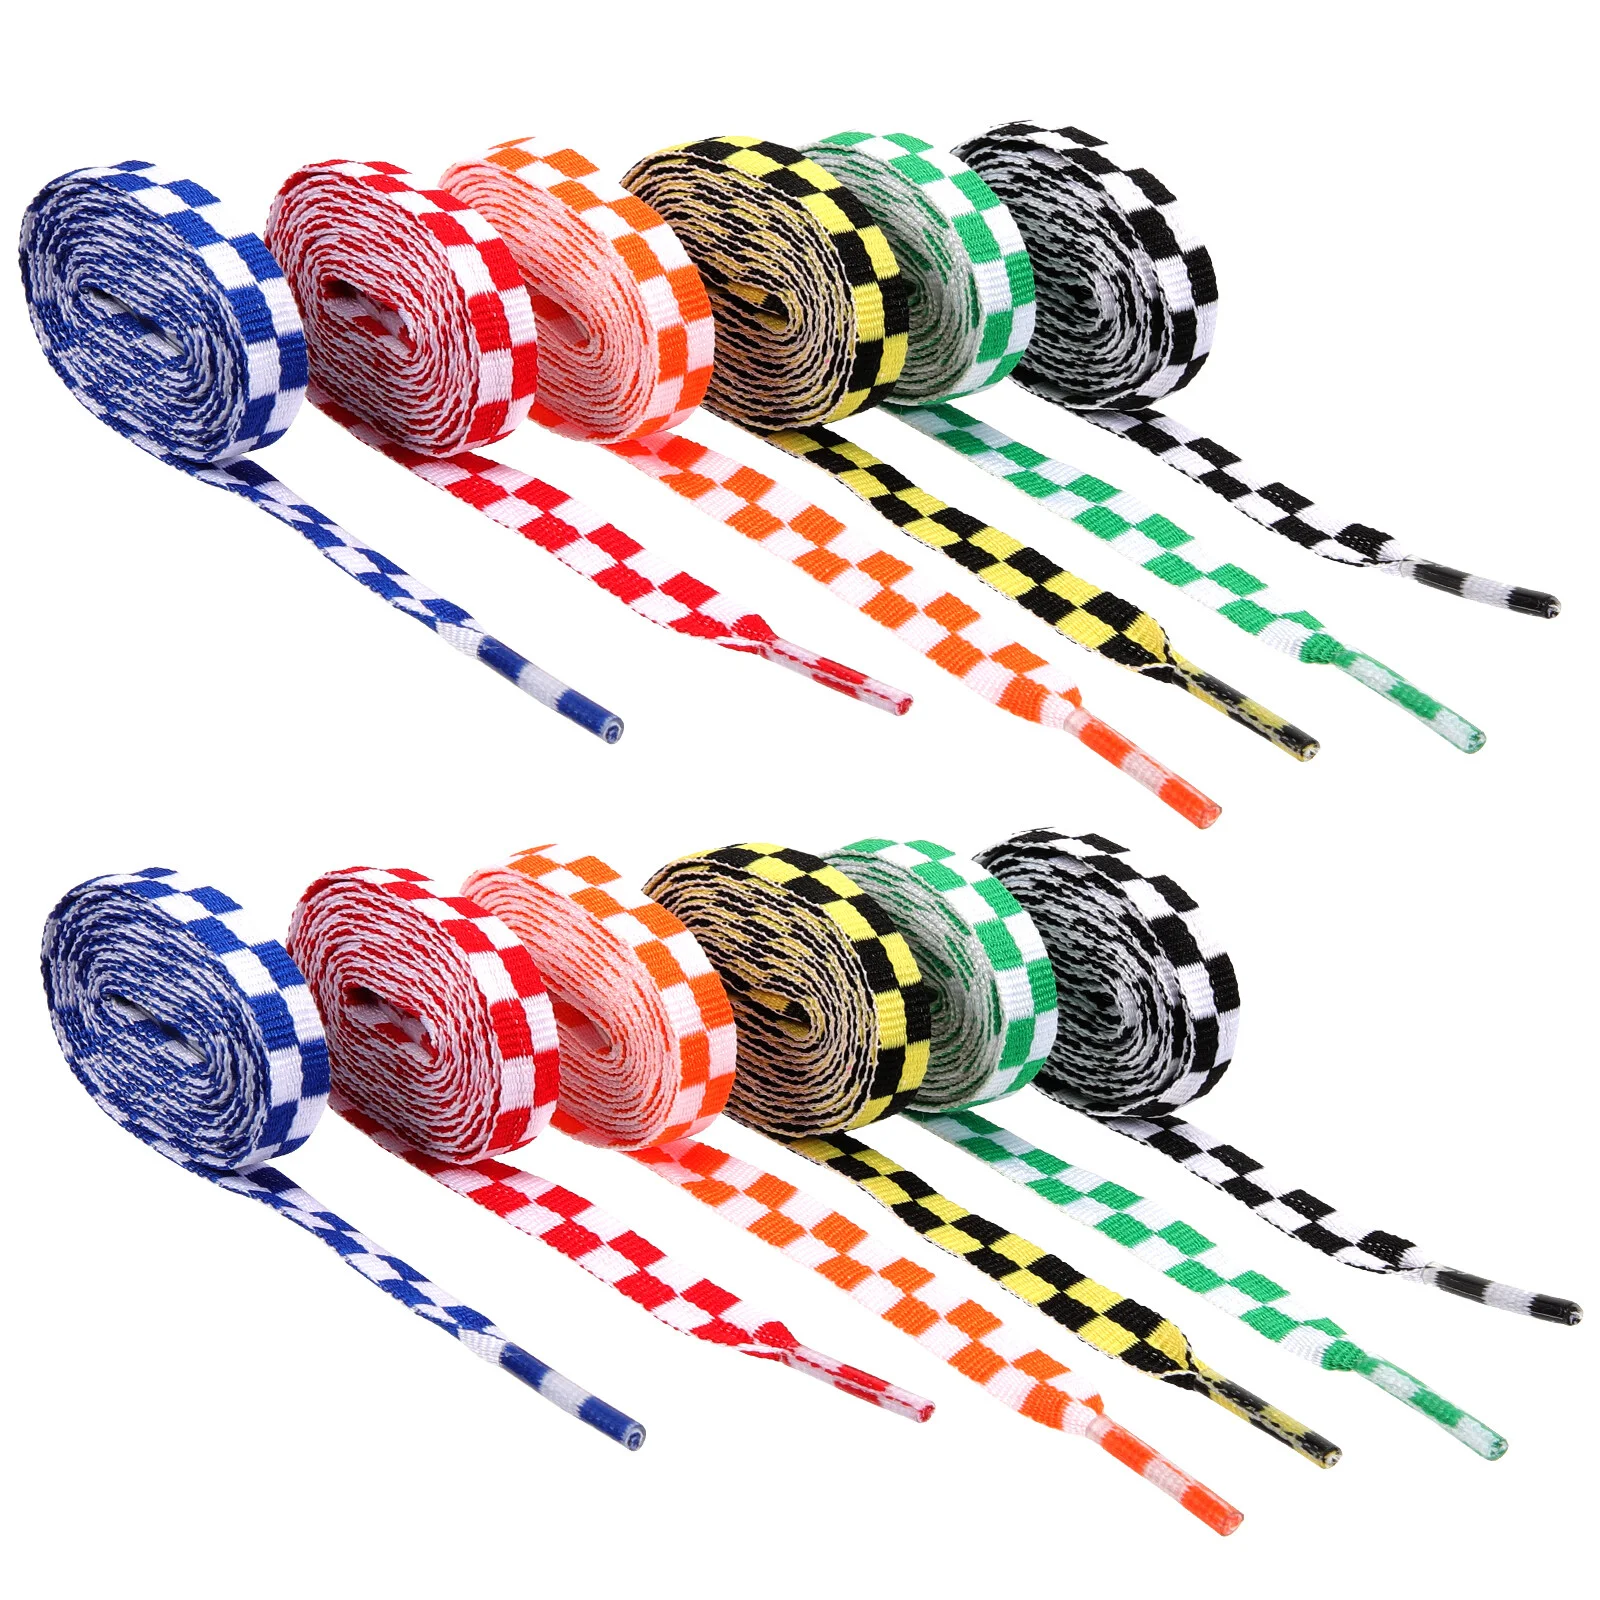 

12 Pairs Shoelace Circular Shoelaces Sneakers Double Layer Flat Polyester Women High Density Shoestring